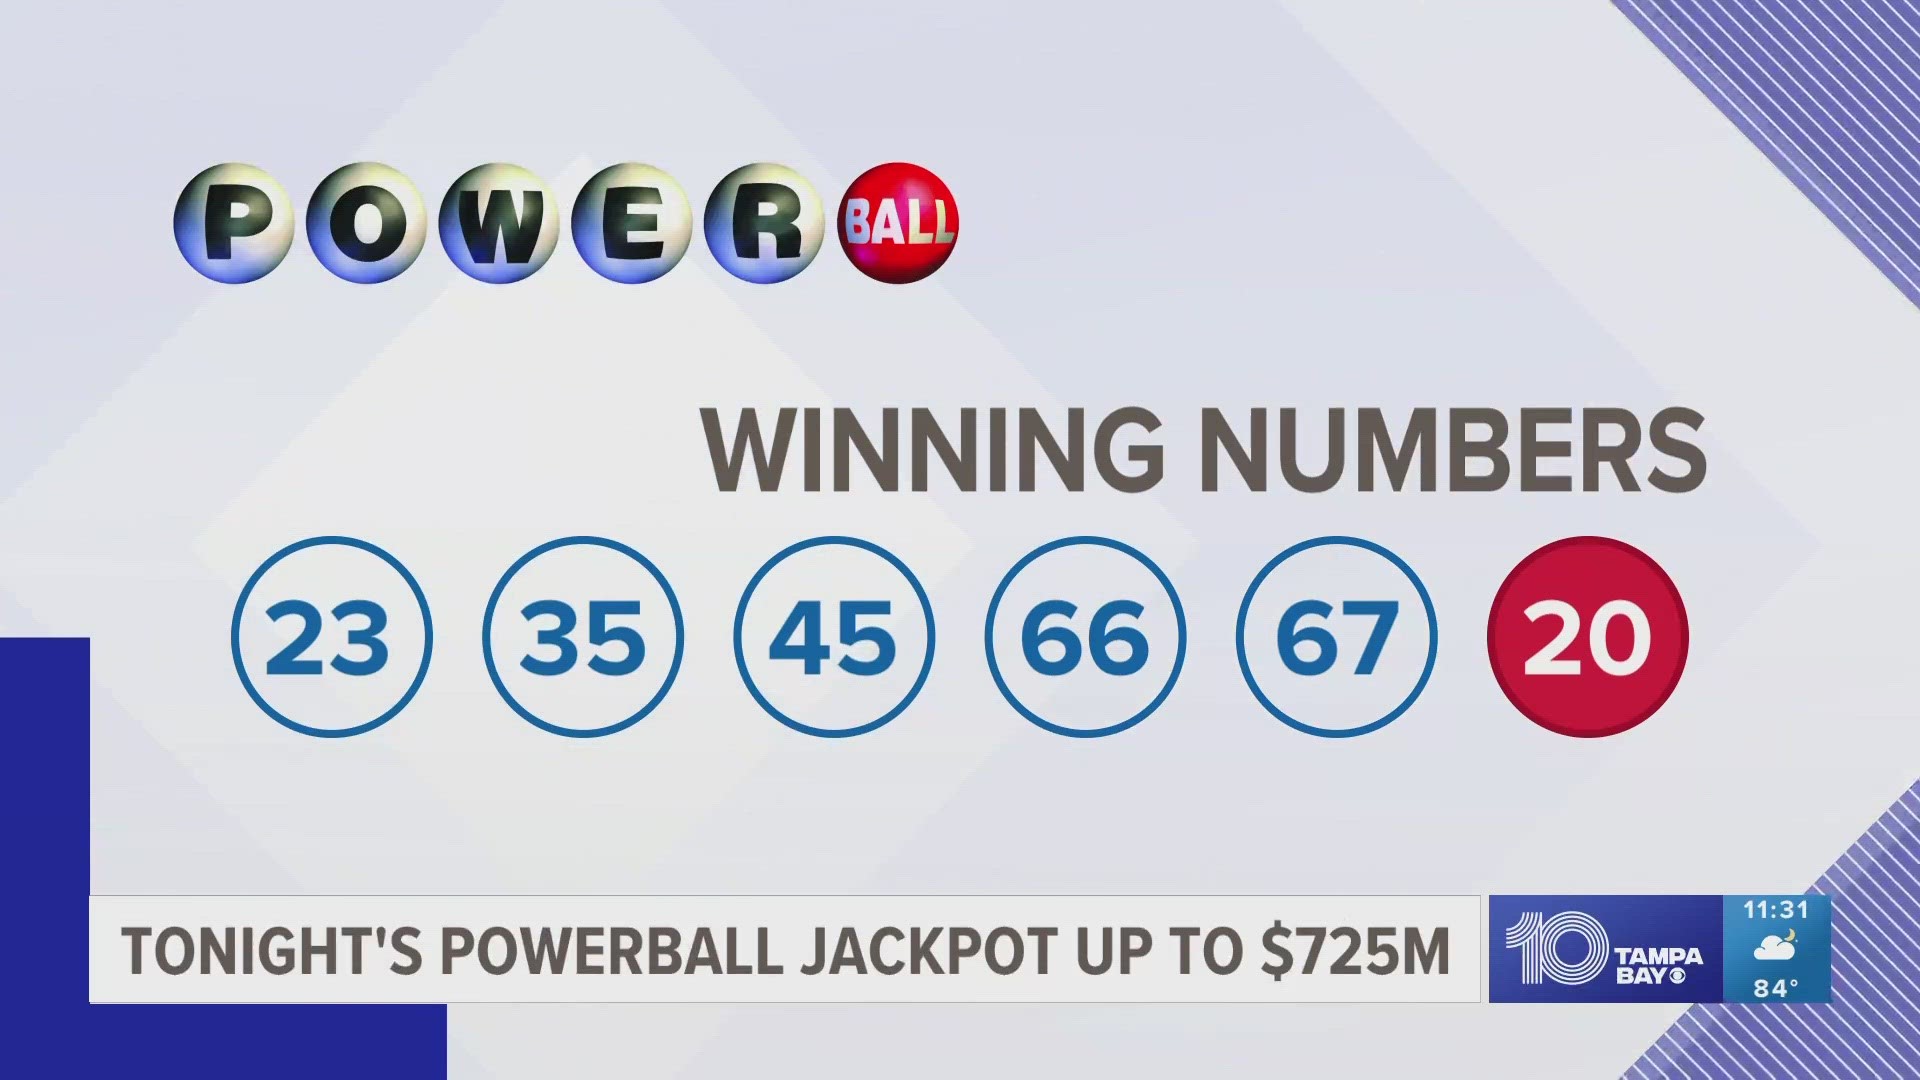 Between Powerball and Mega Millions, there is $1.3 billion on the line this week.